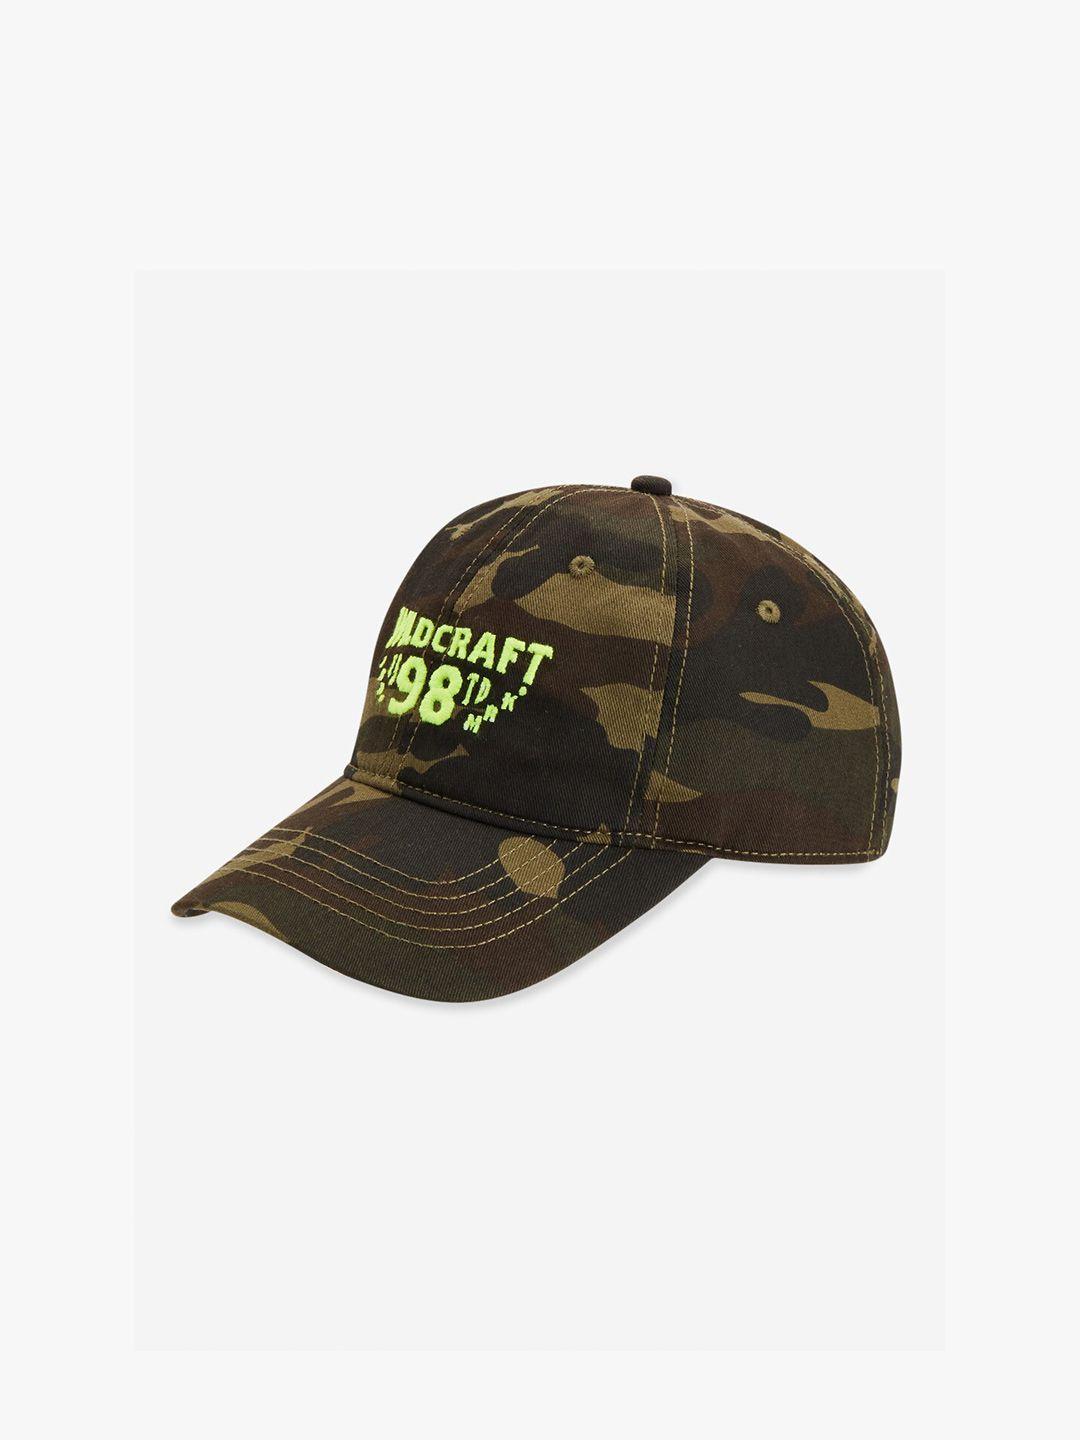 wildcraft adults olive green & green printed cotton baseball cap